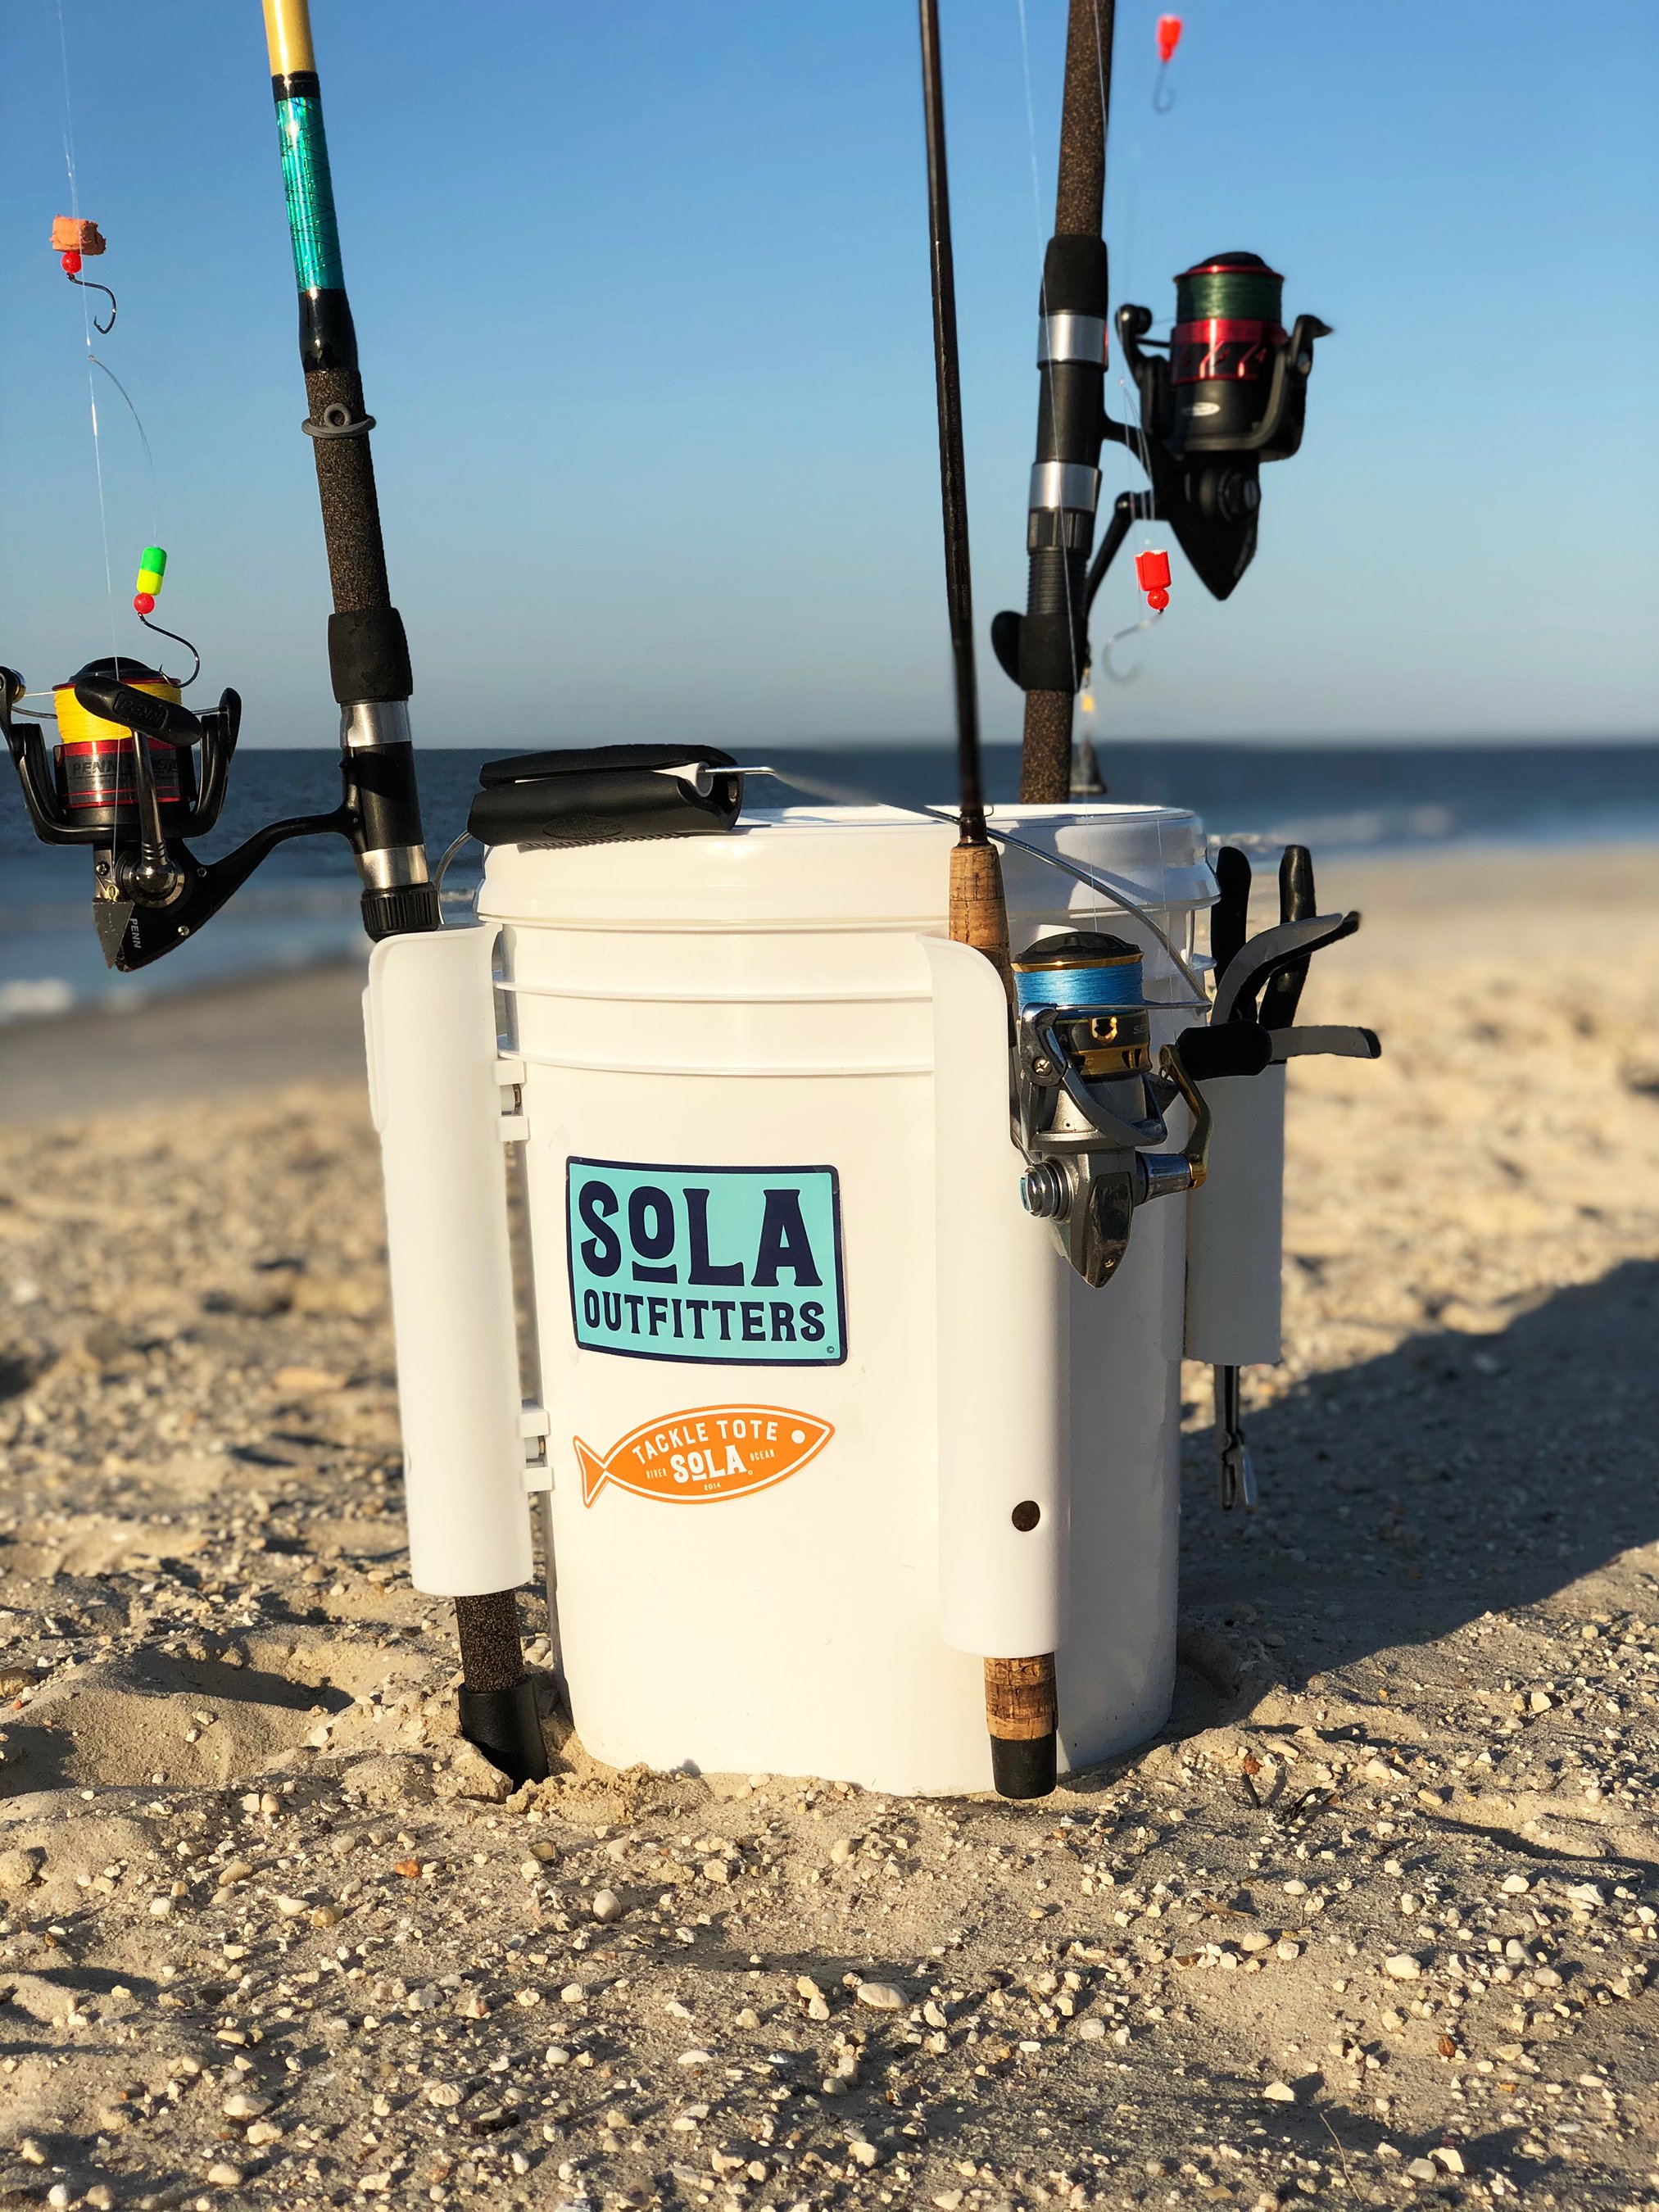  SoLA Outfitters Tackle Tote™  Product naming, branding design and creative direction by Chuck Mitchell  Photograph by Landaiche 